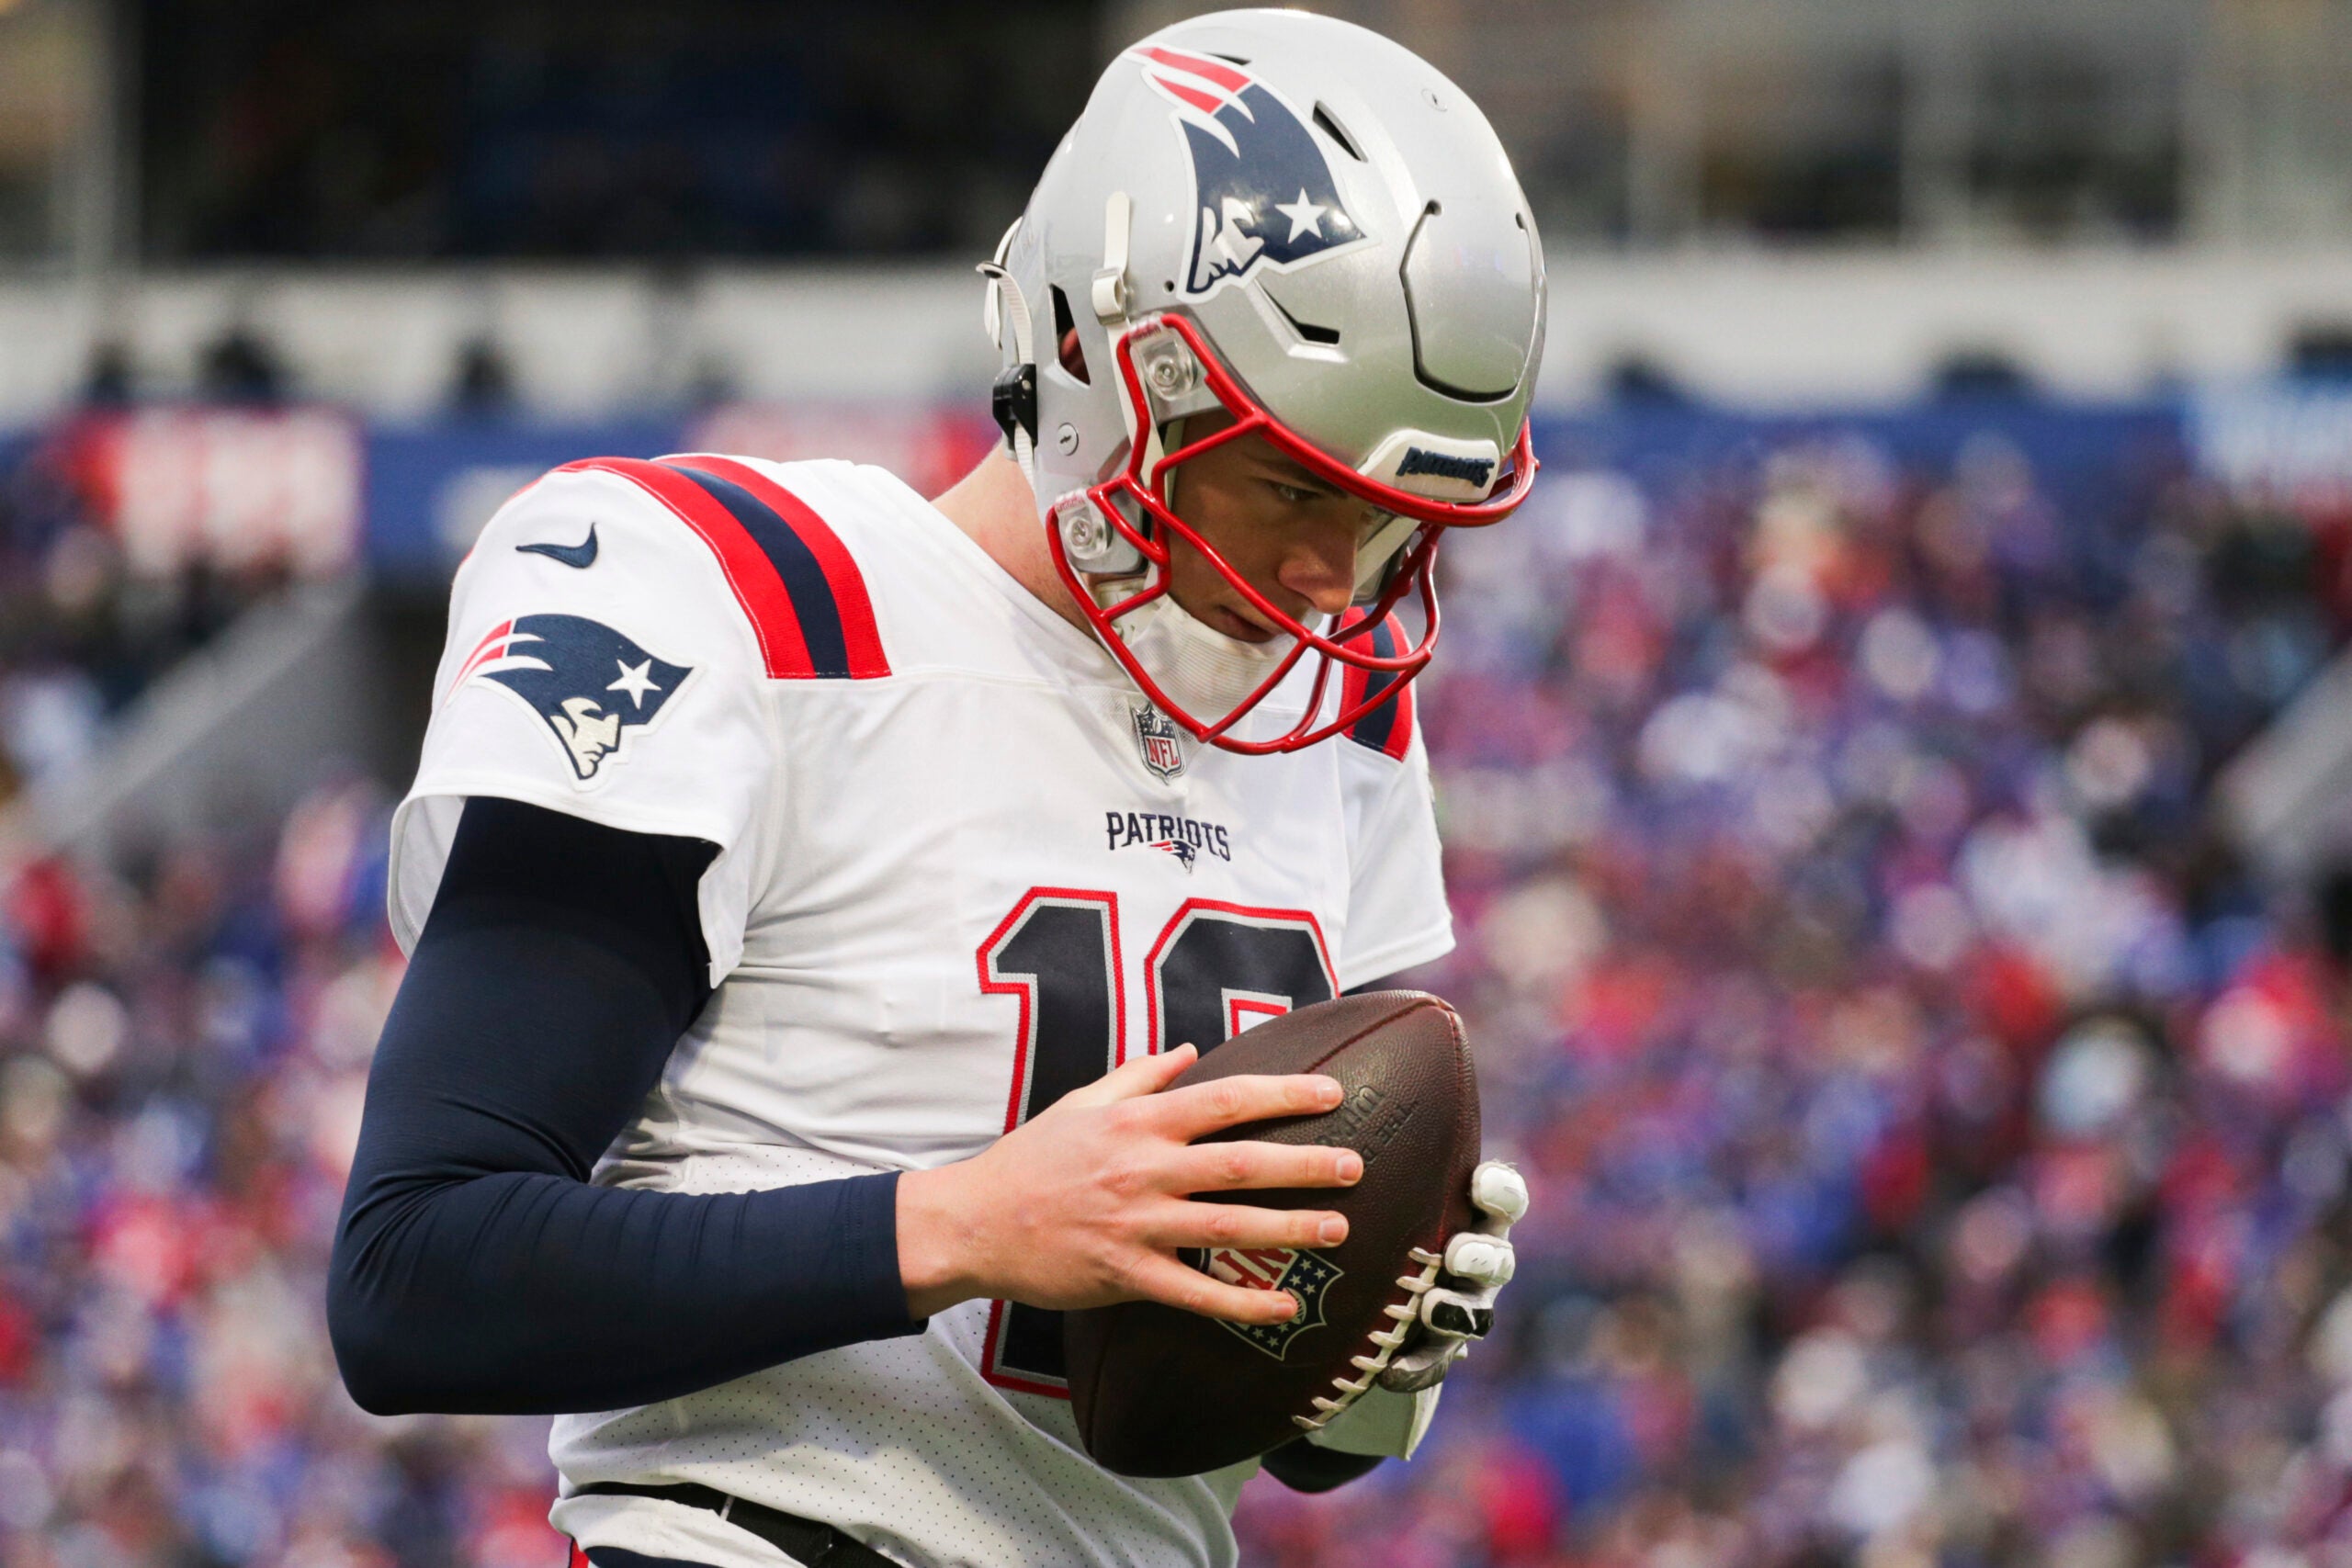 New England Patriots quarterback Mac Jones (10) warms up on the sideline during the first half of an NFL football game against the Buffalo Bills on Sunday, Jan. 8, 2023, in Orchard Park, N.Y.